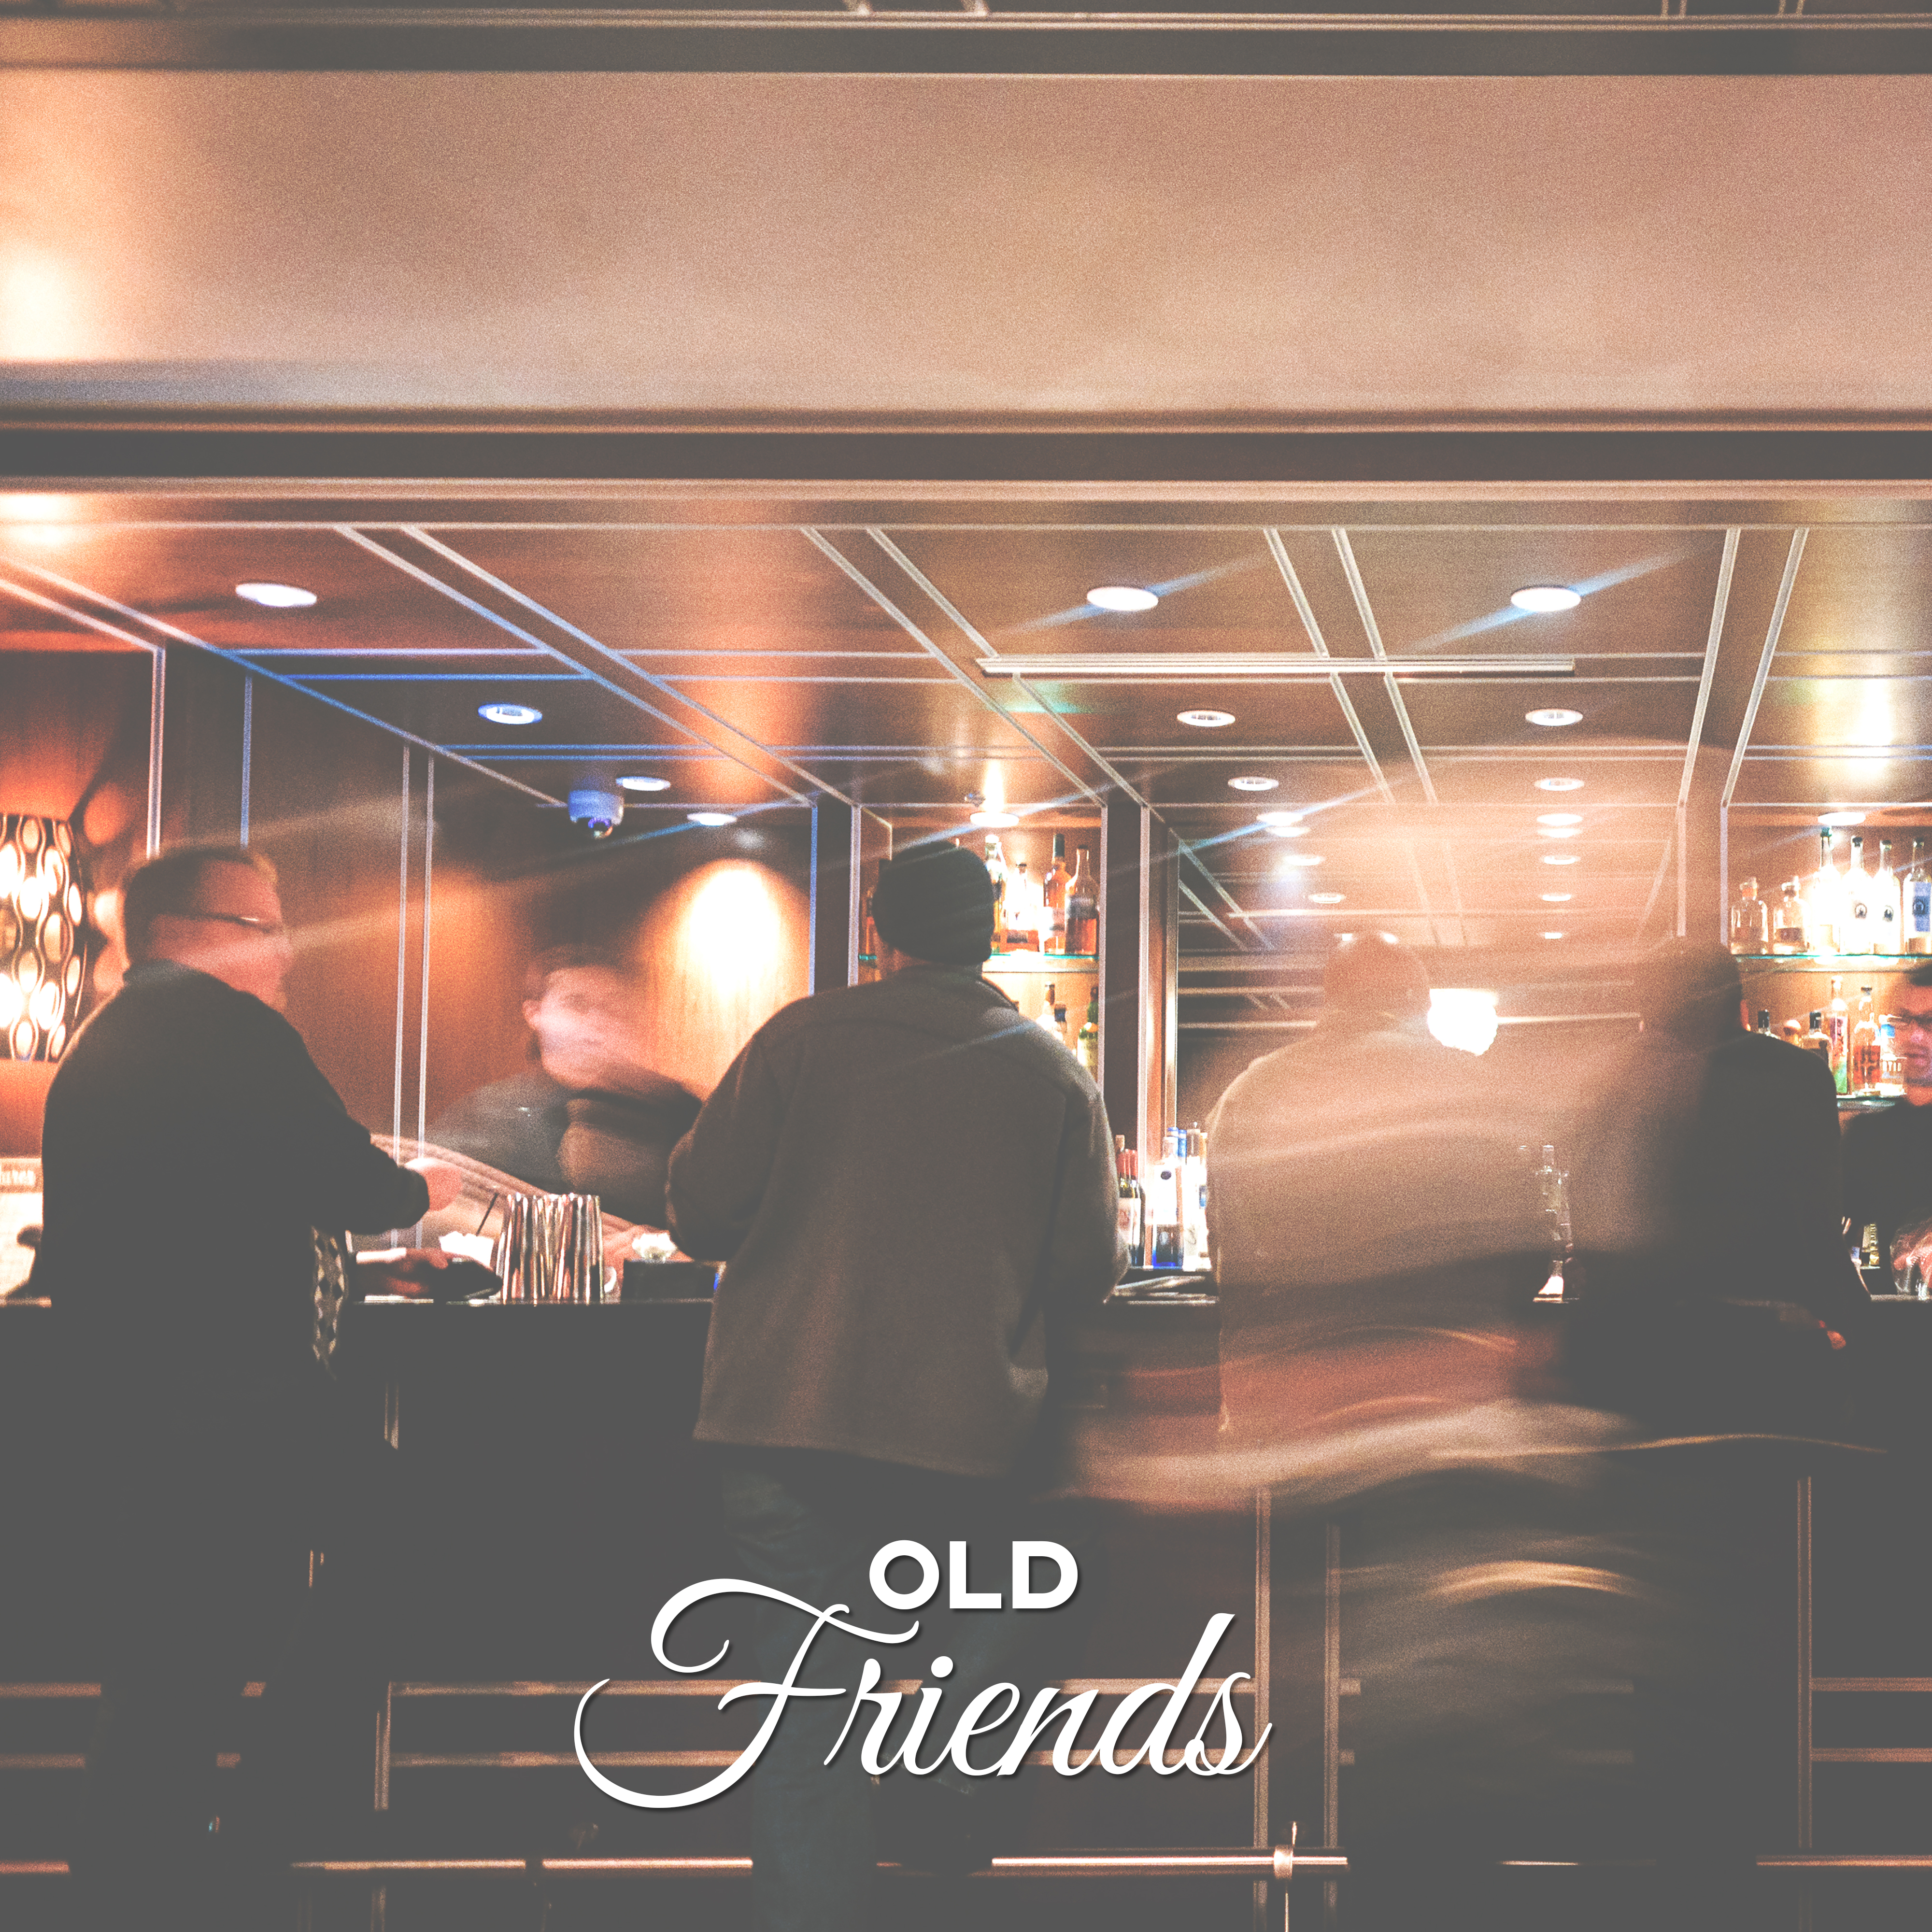 Old Friends - Famous Place, Good Coffee, Self-service, Tasty Alcohol